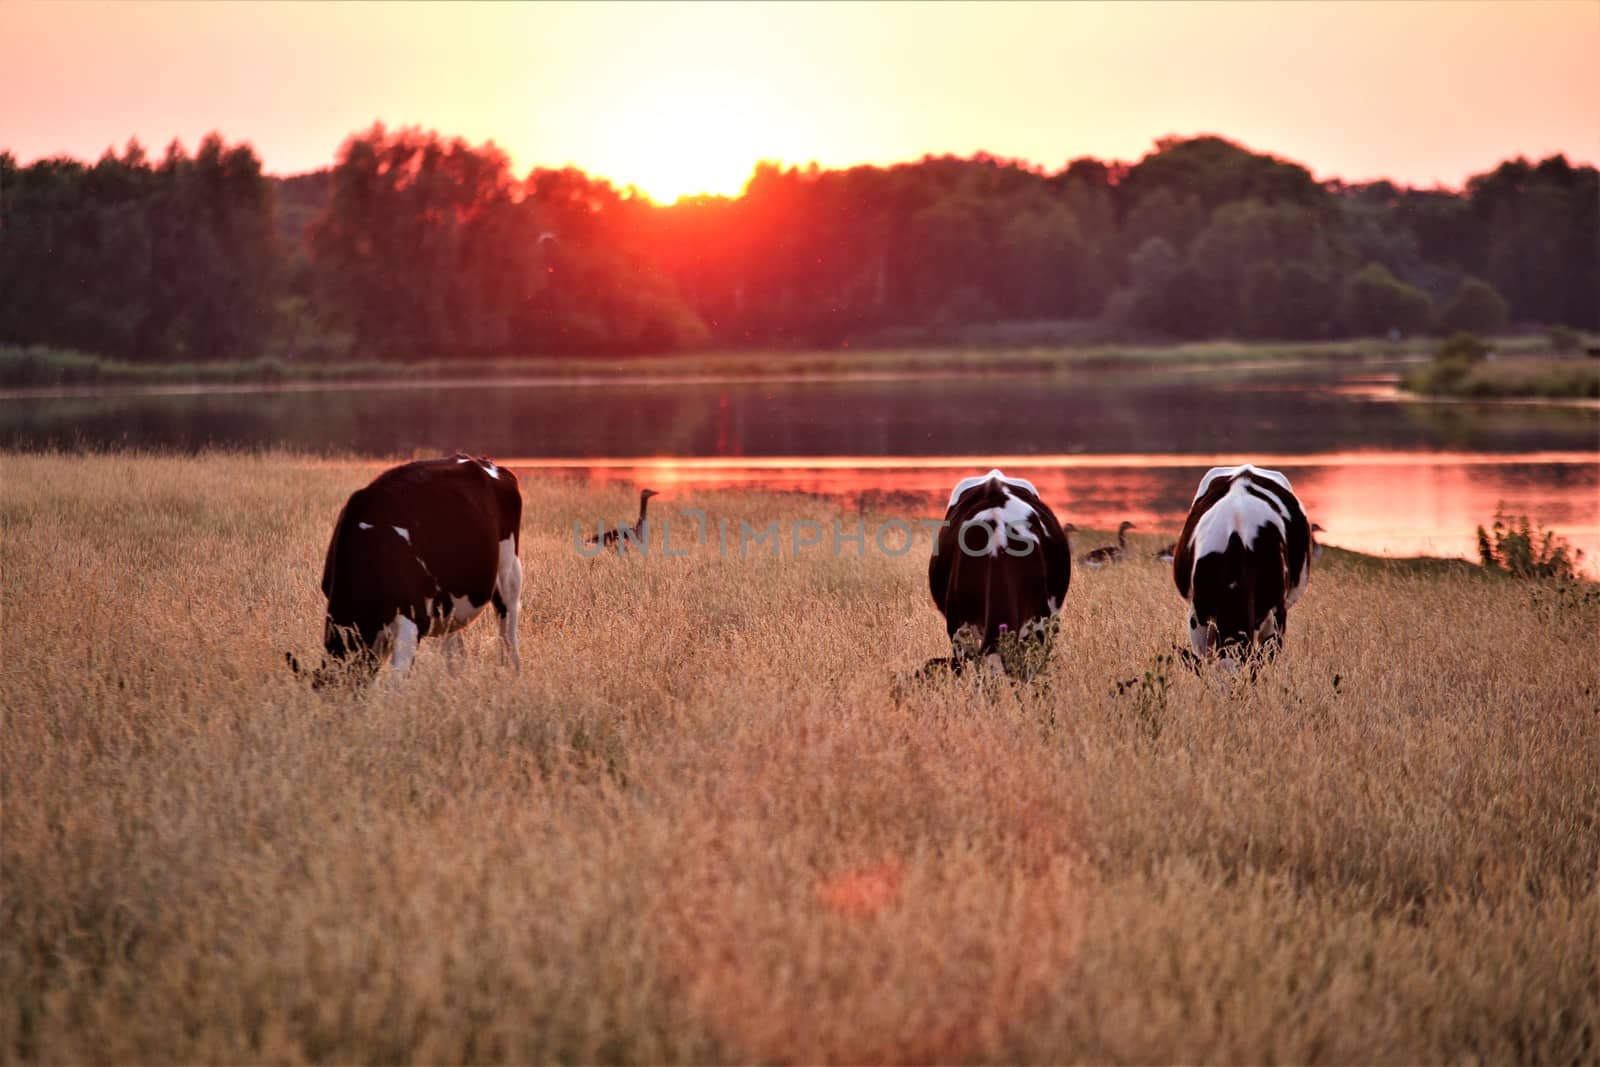 A sunset at a lake with cows on the pasture and ducks and trees on the bank of the lake by Luise123